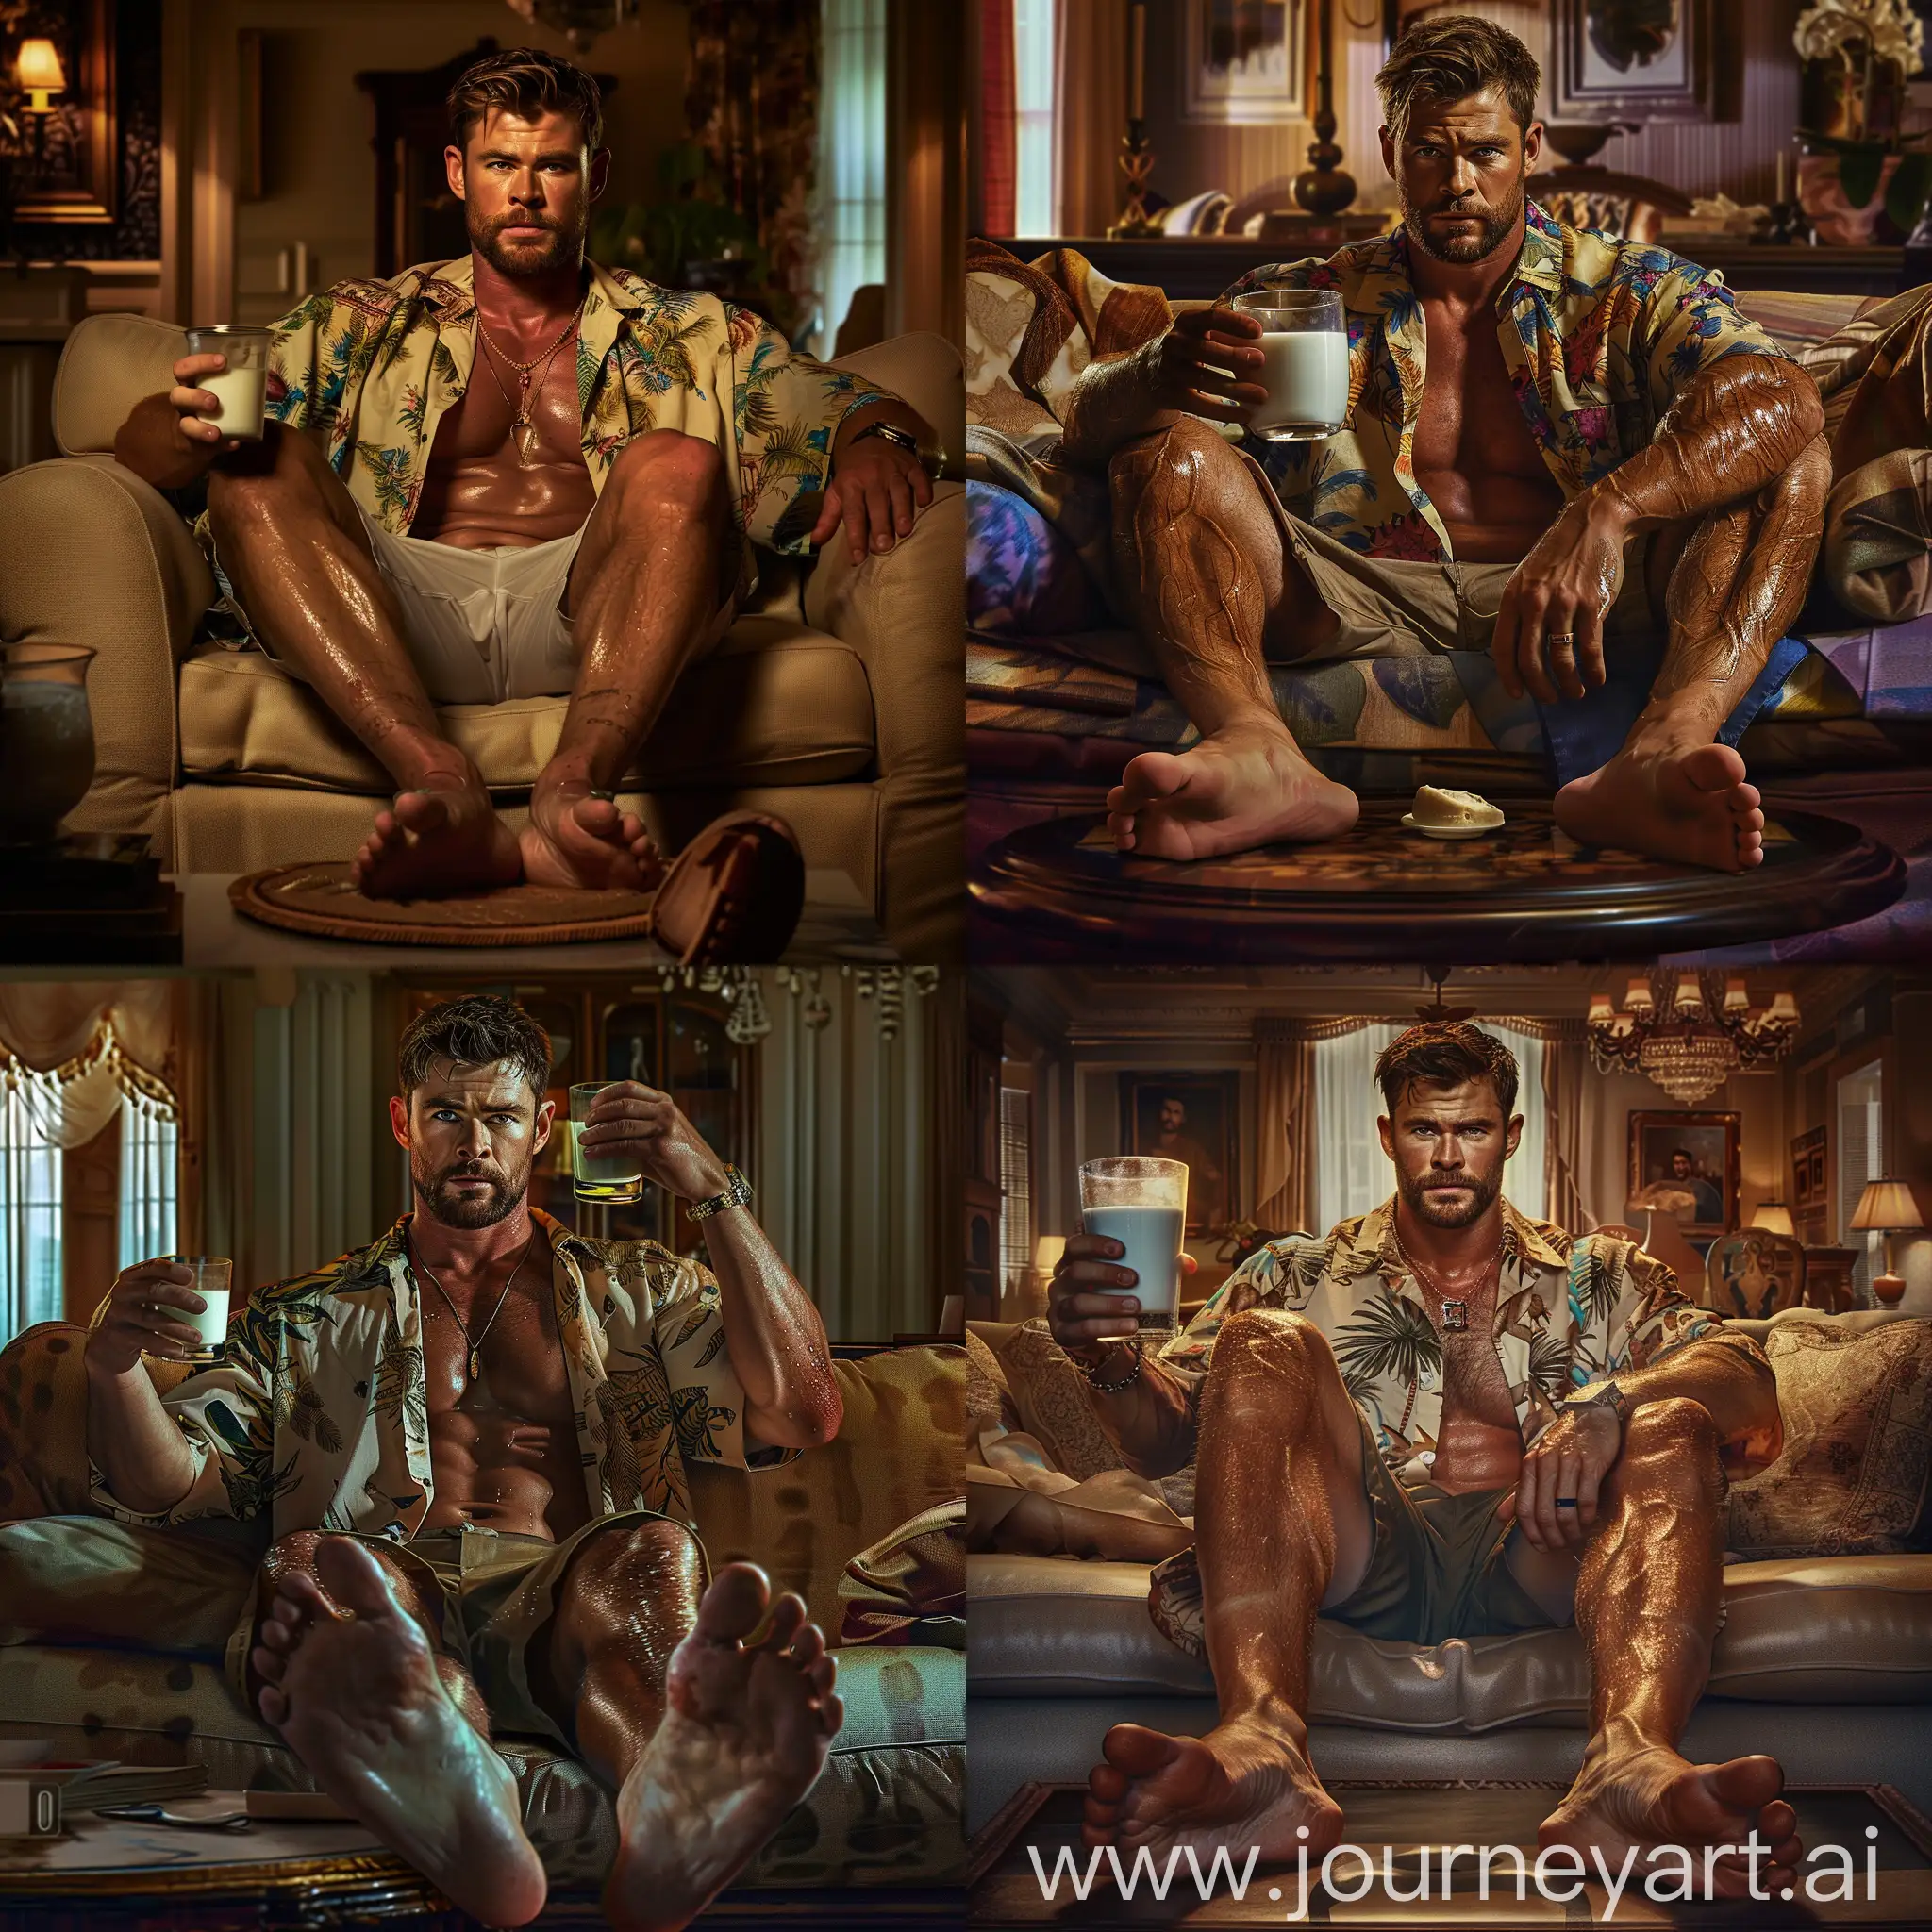 Movie scene, realistic, Good looking muscular Chris Hemsworth sitting on the couch, wearing an unbuttoned hawaiian shirt, big muscular arms, handsome Chris Hemsworth face, holding a glass of milk, big biceps, sweaty glistening skin, abs and hard pecs, with his feet resting on a footstool, showing his big soles, feet soles on a footstool table, rich living room background, cinematic lighting